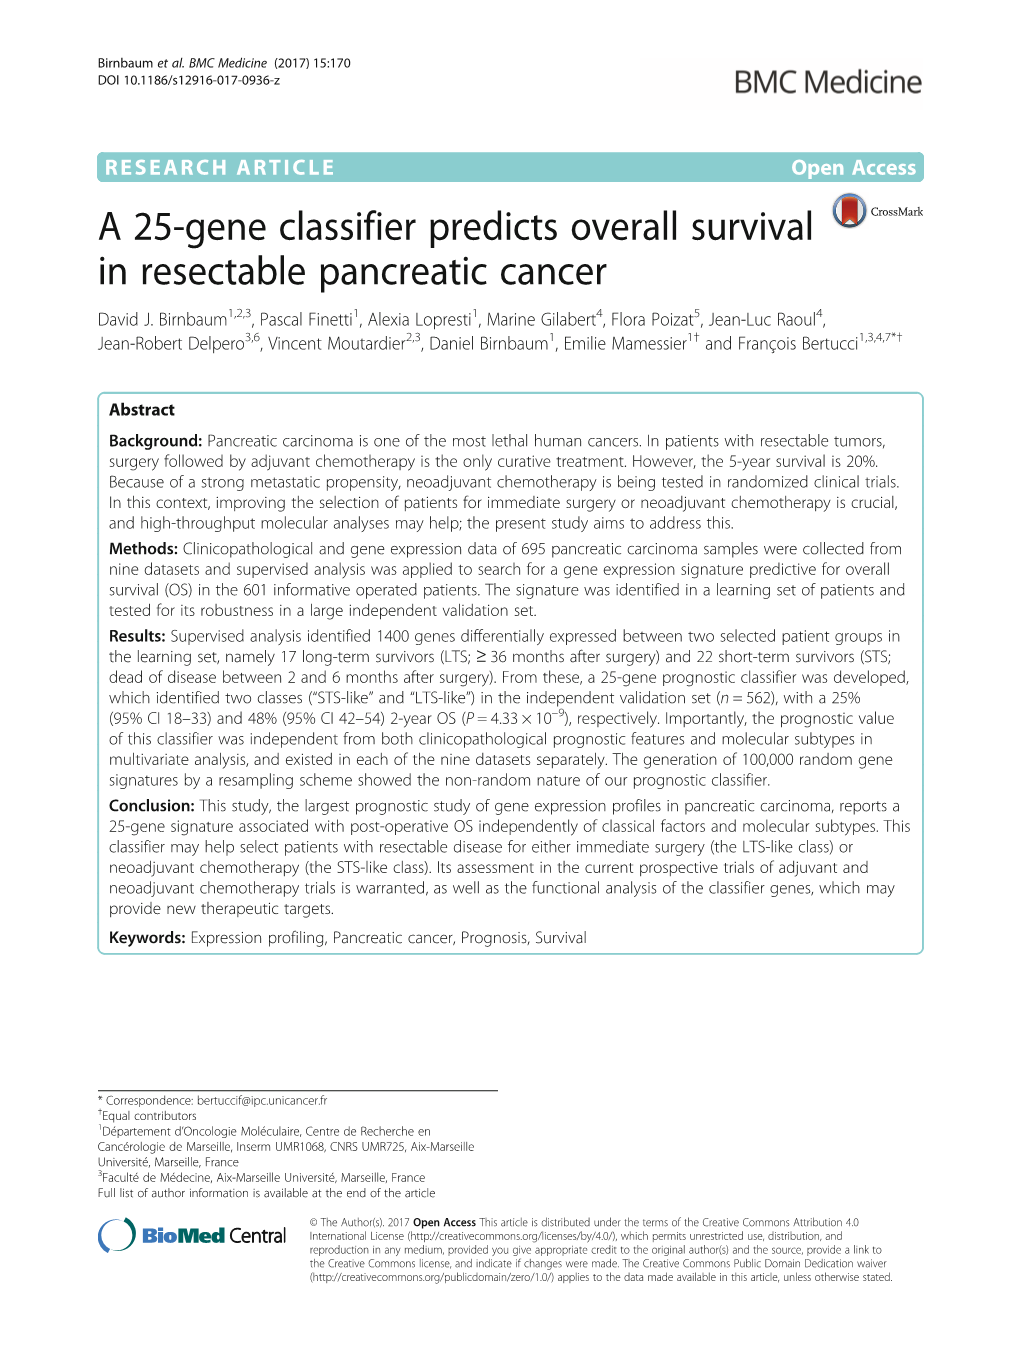 A 25-Gene Classifier Predicts Overall Survival in Resectable Pancreatic Cancer David J